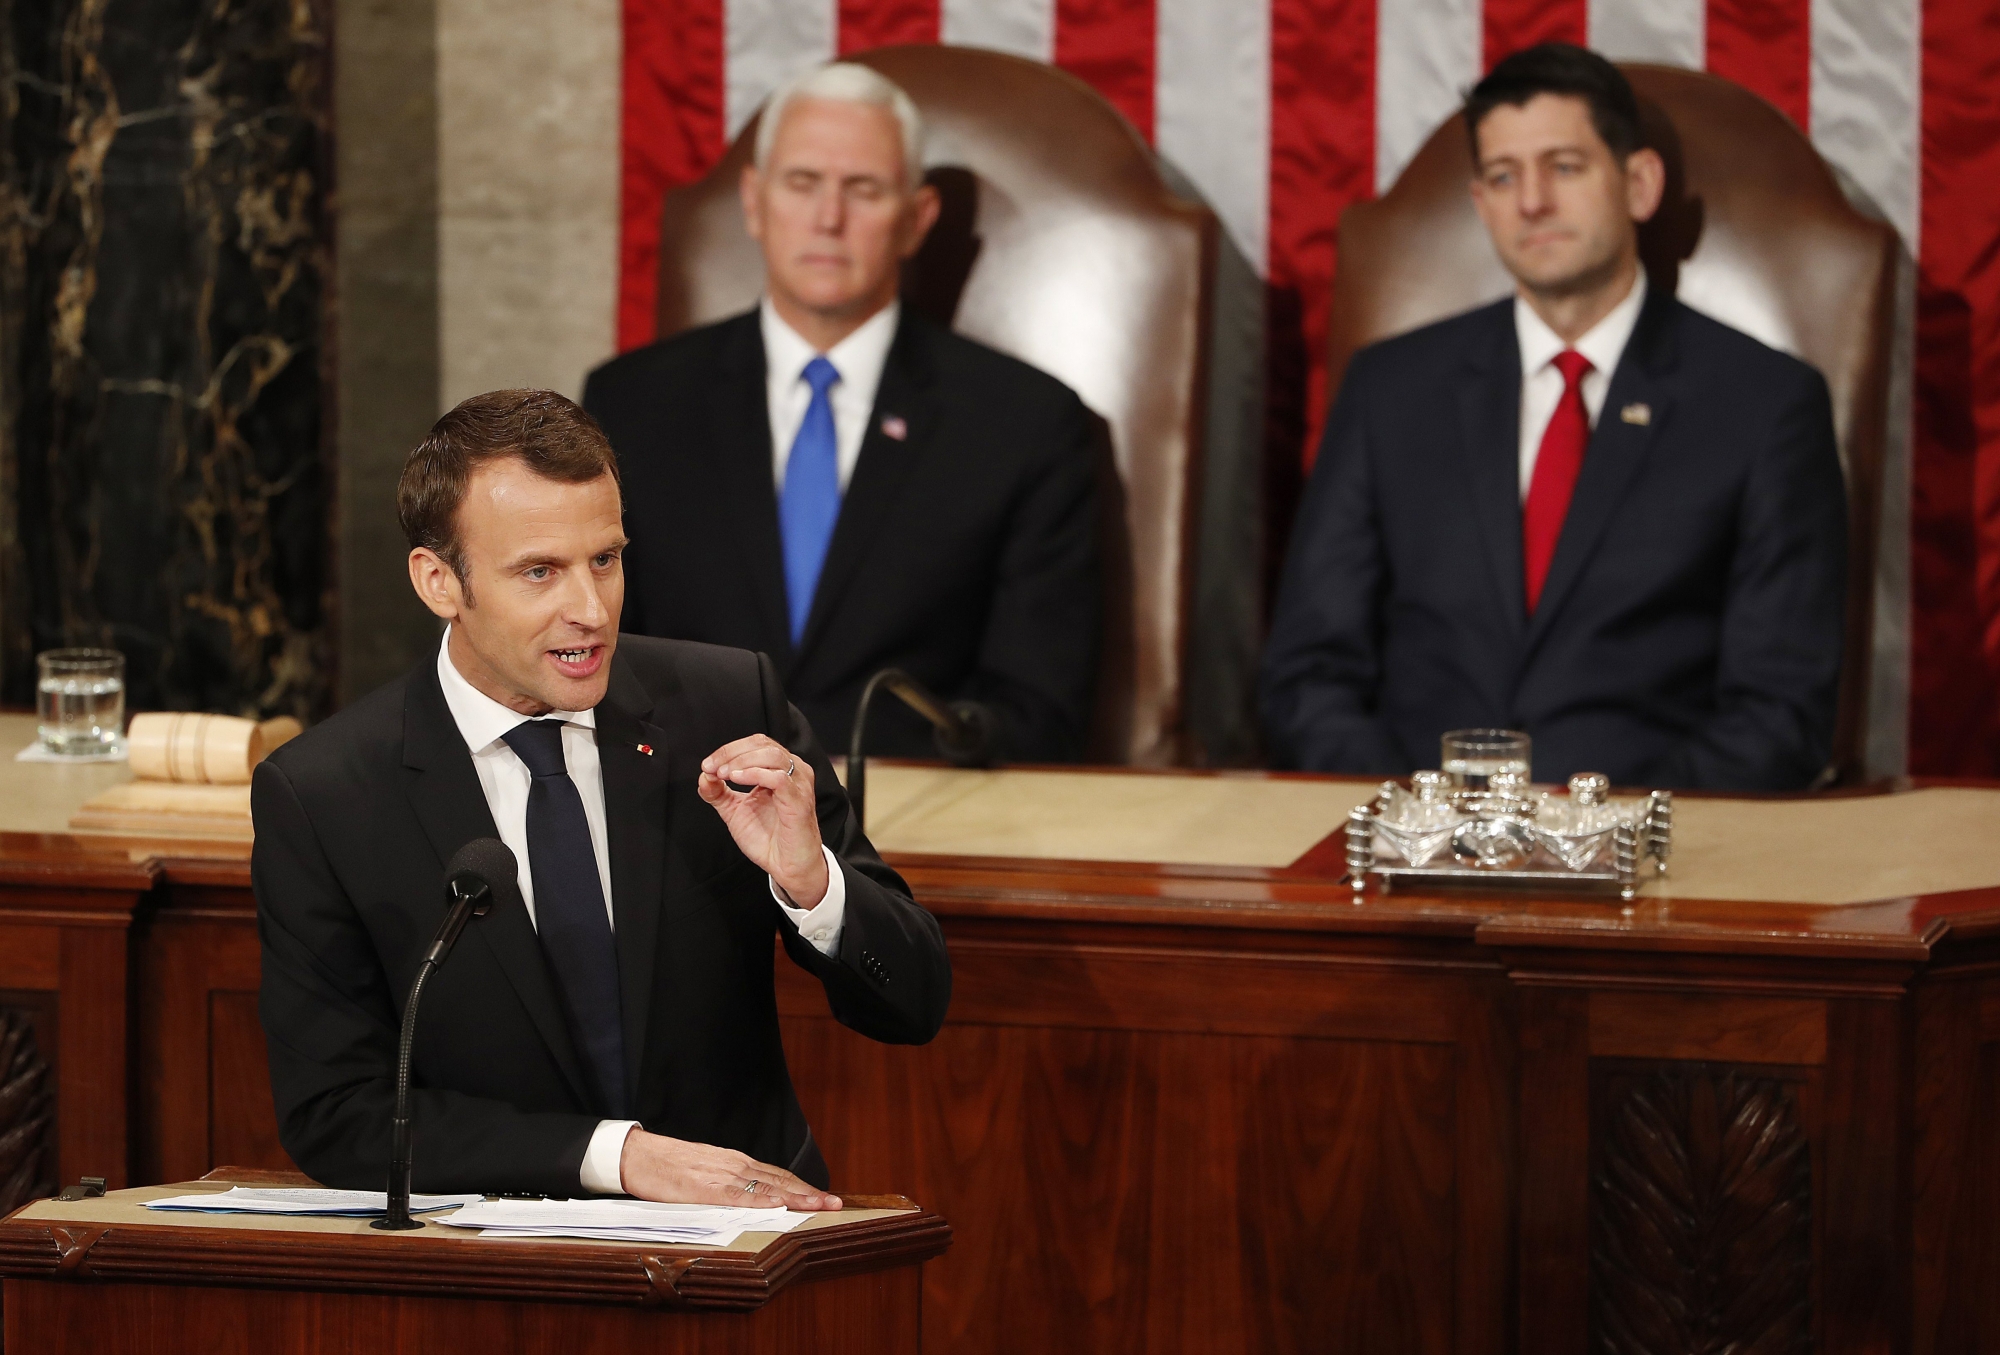 epa06692234 French President Emmanuel Macron during his address to a joint meeting of Congress in the House chamber on Capitol Hill in Washington, DC, USA, 25 April 2018. President Macron is on a three-day visit to Washington DC, where he met with US President Donald J. Trump before addressing Congress.  At rear are US Vice president Mike Pence (L) and Speaker of the House Paul Ryan (R).  EPA/ERIK S. LESSER USA FRANCE MACRON CONGRESS